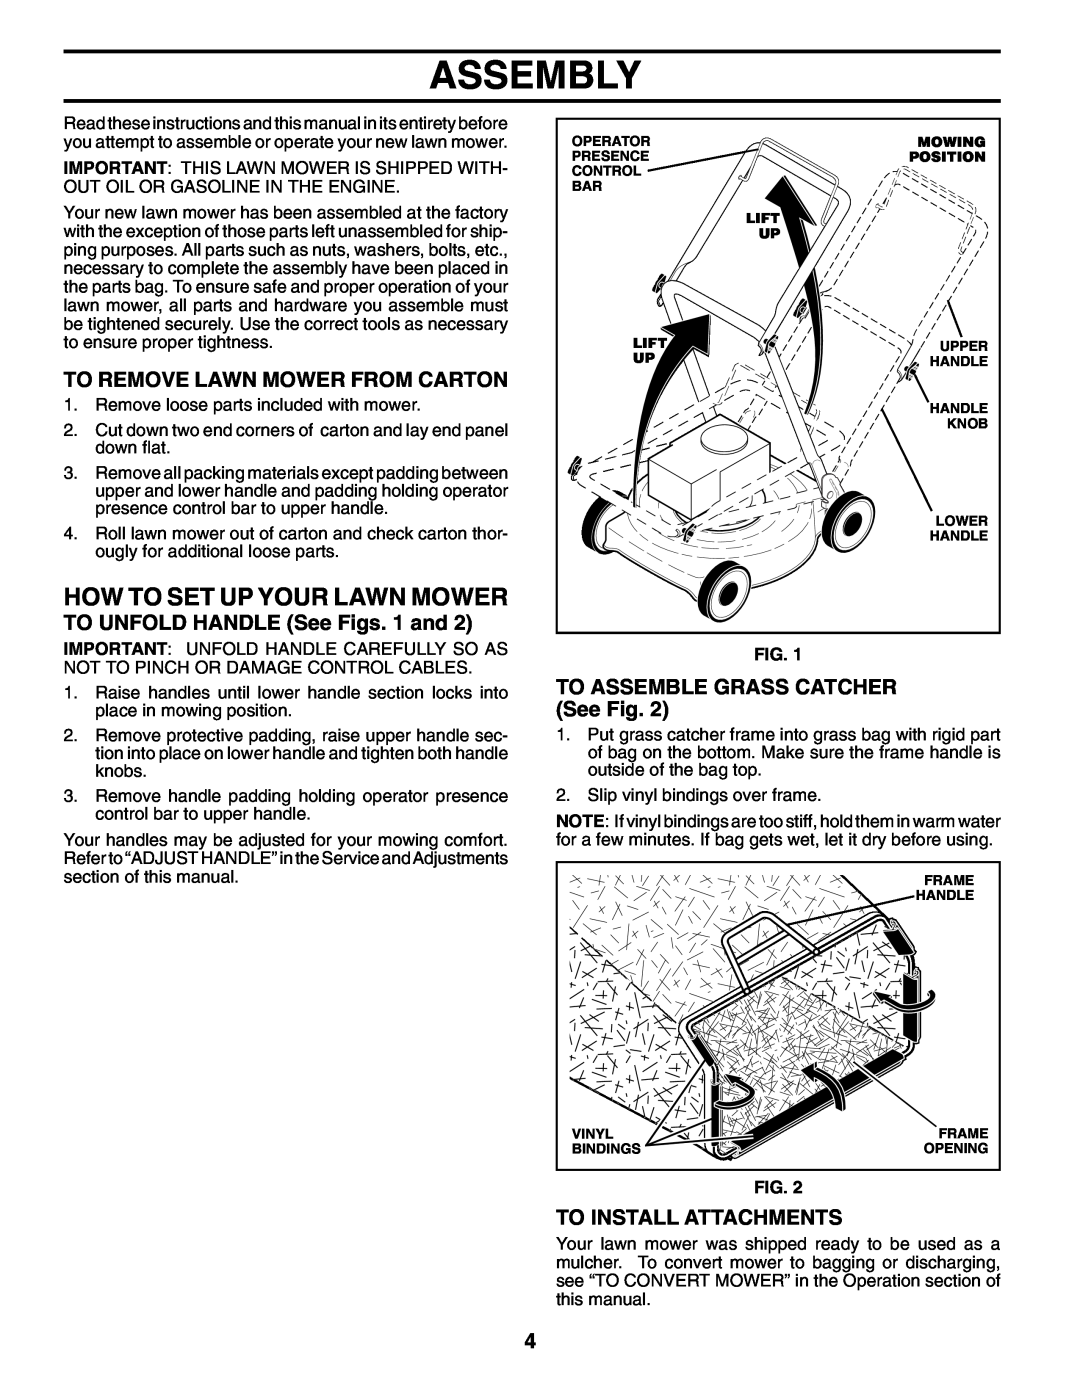 Husqvarna 5521 CHV 96143000106 manual Assembly, How To Set Up Your Lawn Mower, To Remove Lawn Mower From Carton, Fig 